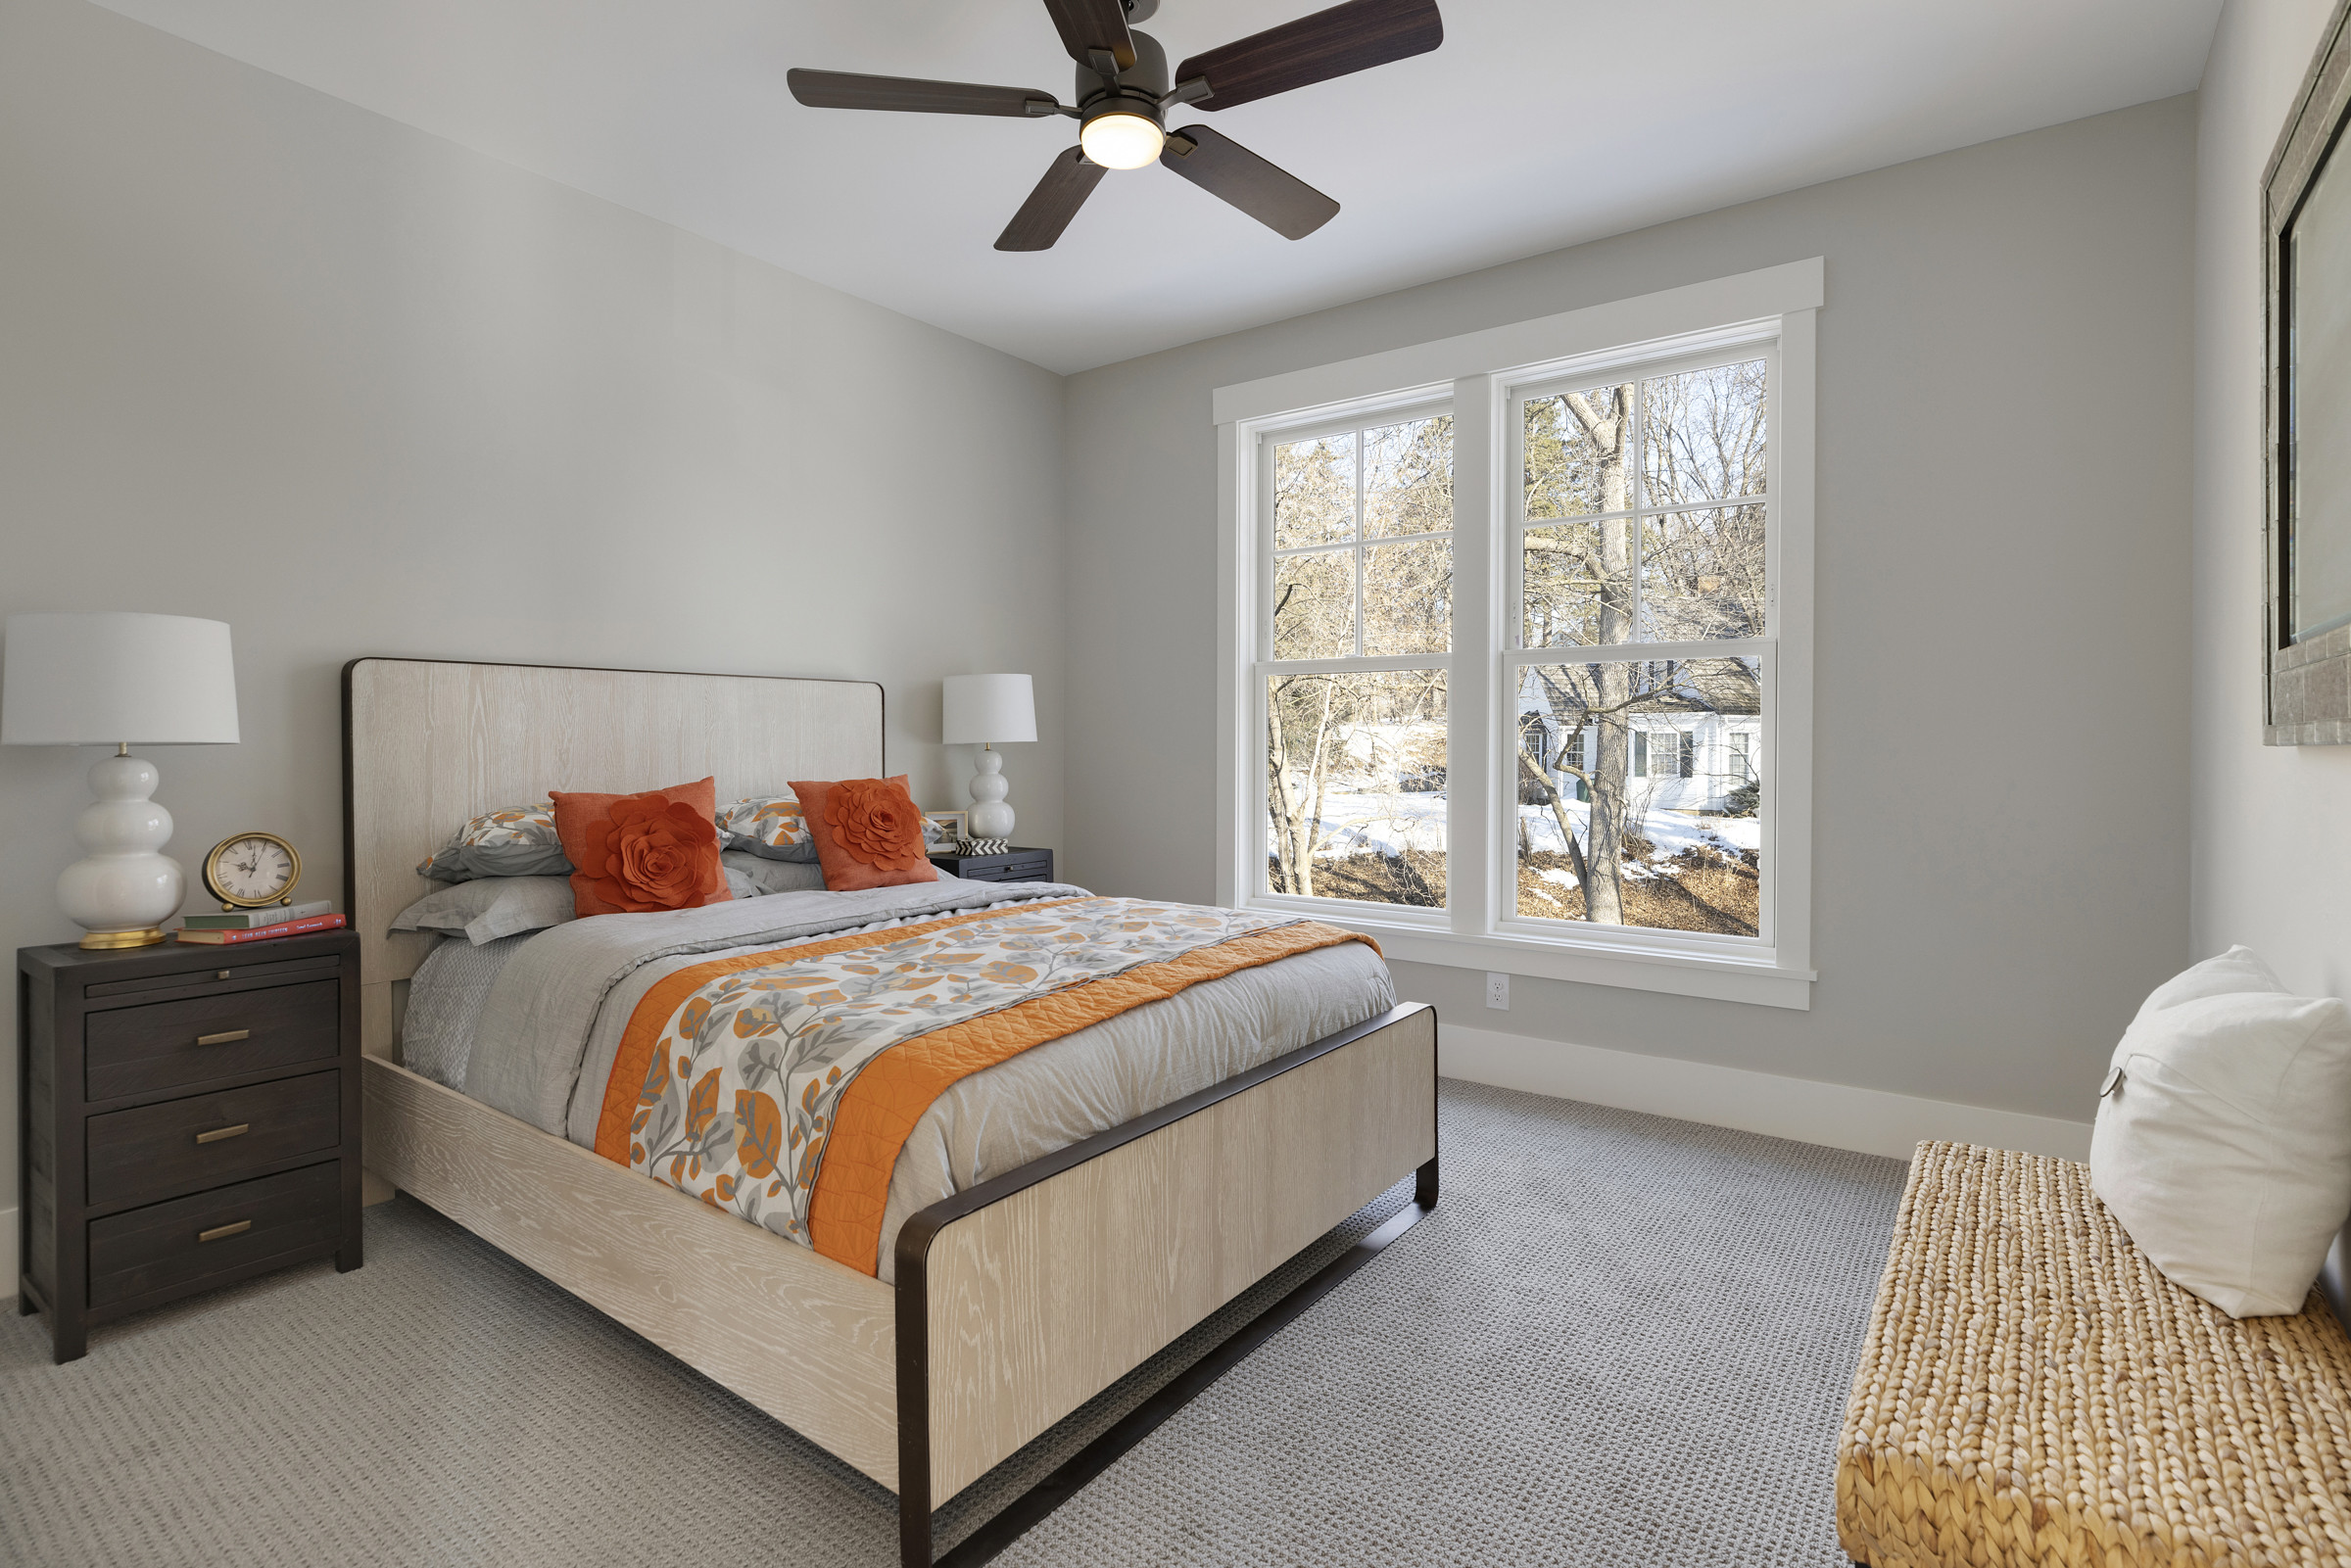 A bedroom with a gray bed and orange accents.